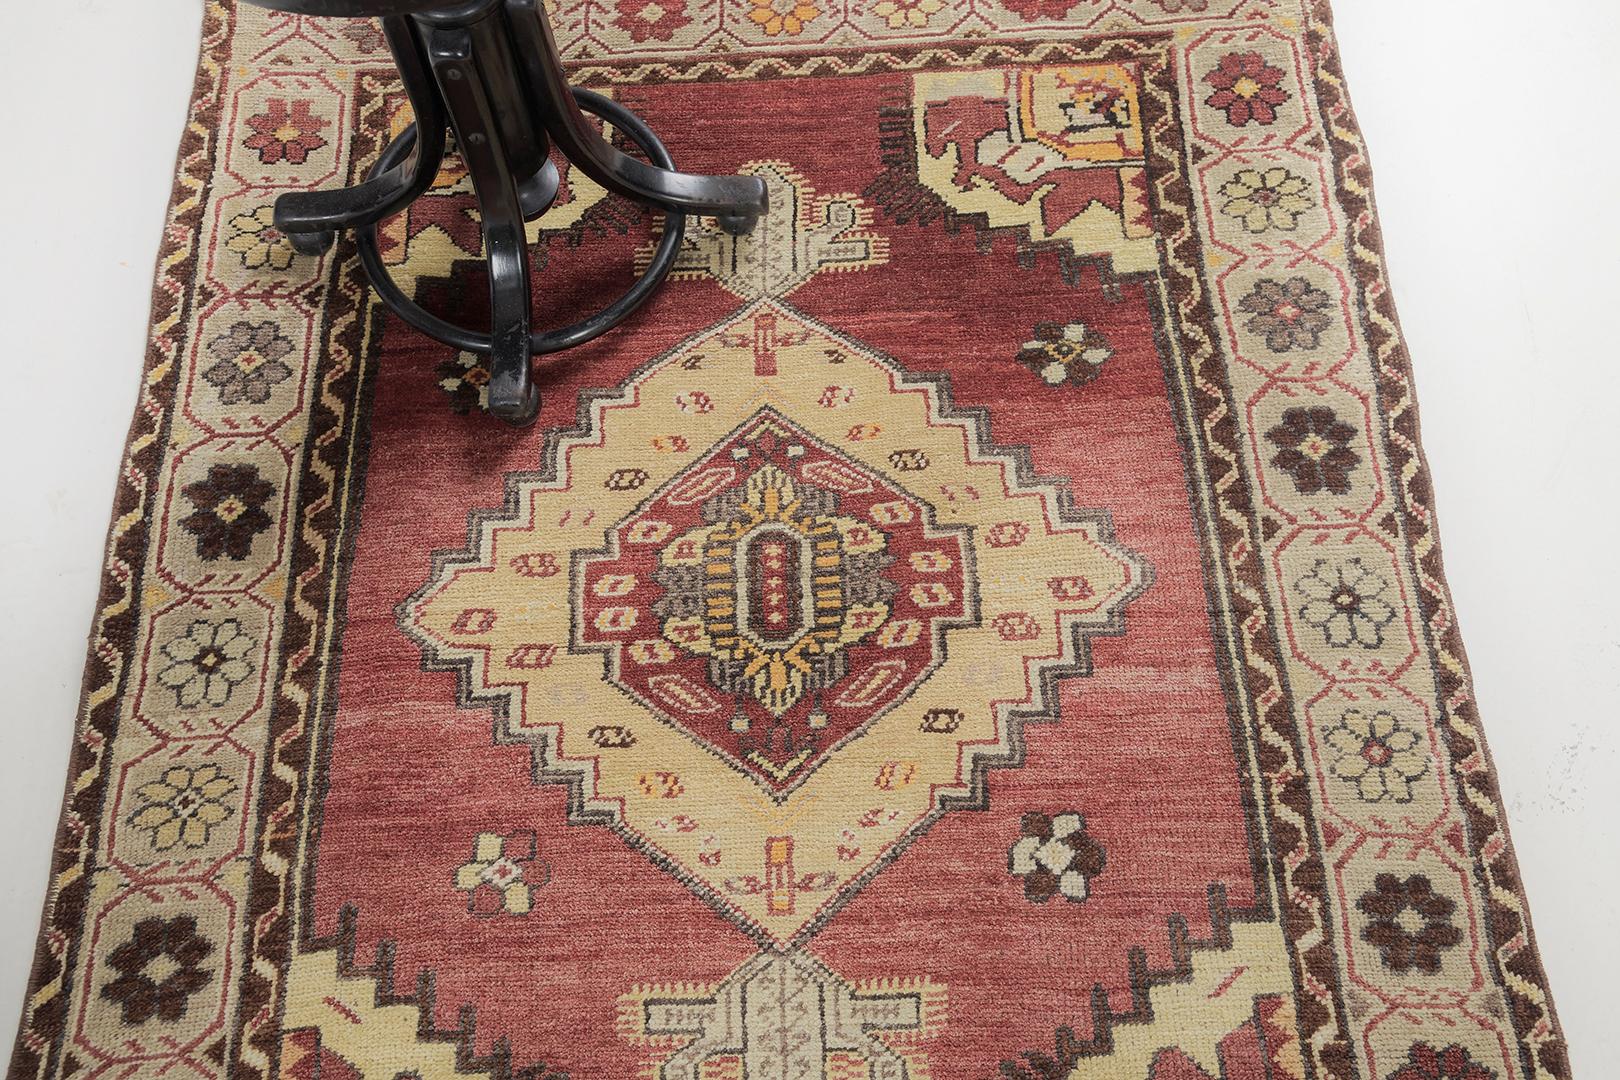 Konya is a noteworthy masterpiece that brings sophistication to any room. Grandiose medallion and florid design elements work well with the remarkable spandrels. Turkish Anatolian rugs weave together dyes and colors, motifs, textures, and techniques